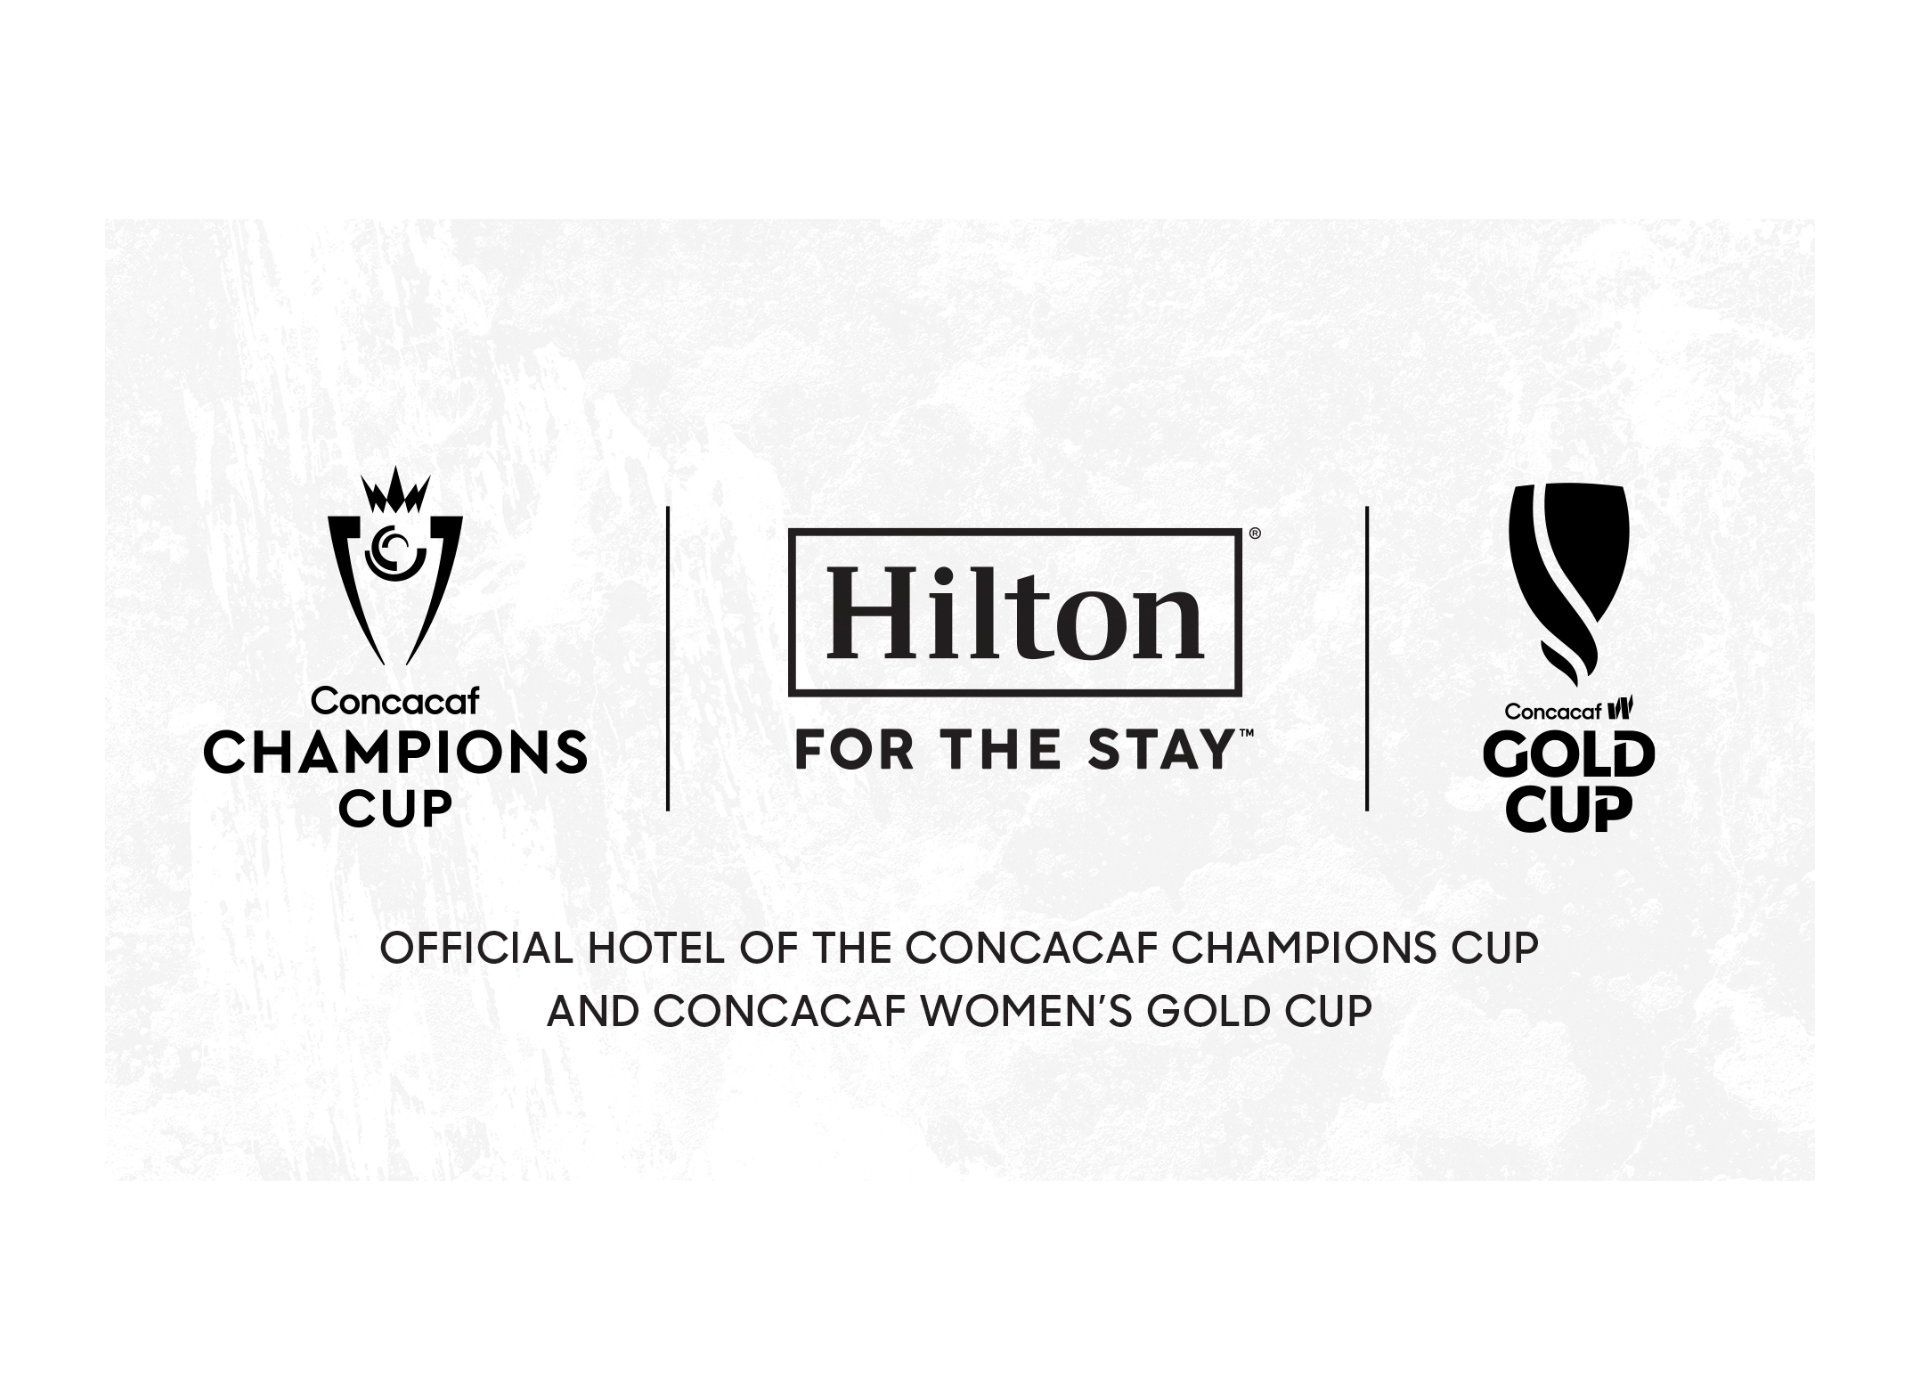 Concacaf and Hilton - Official Hotel of the Concacaf Champions Cup and Concacaf Women's Gold Cup